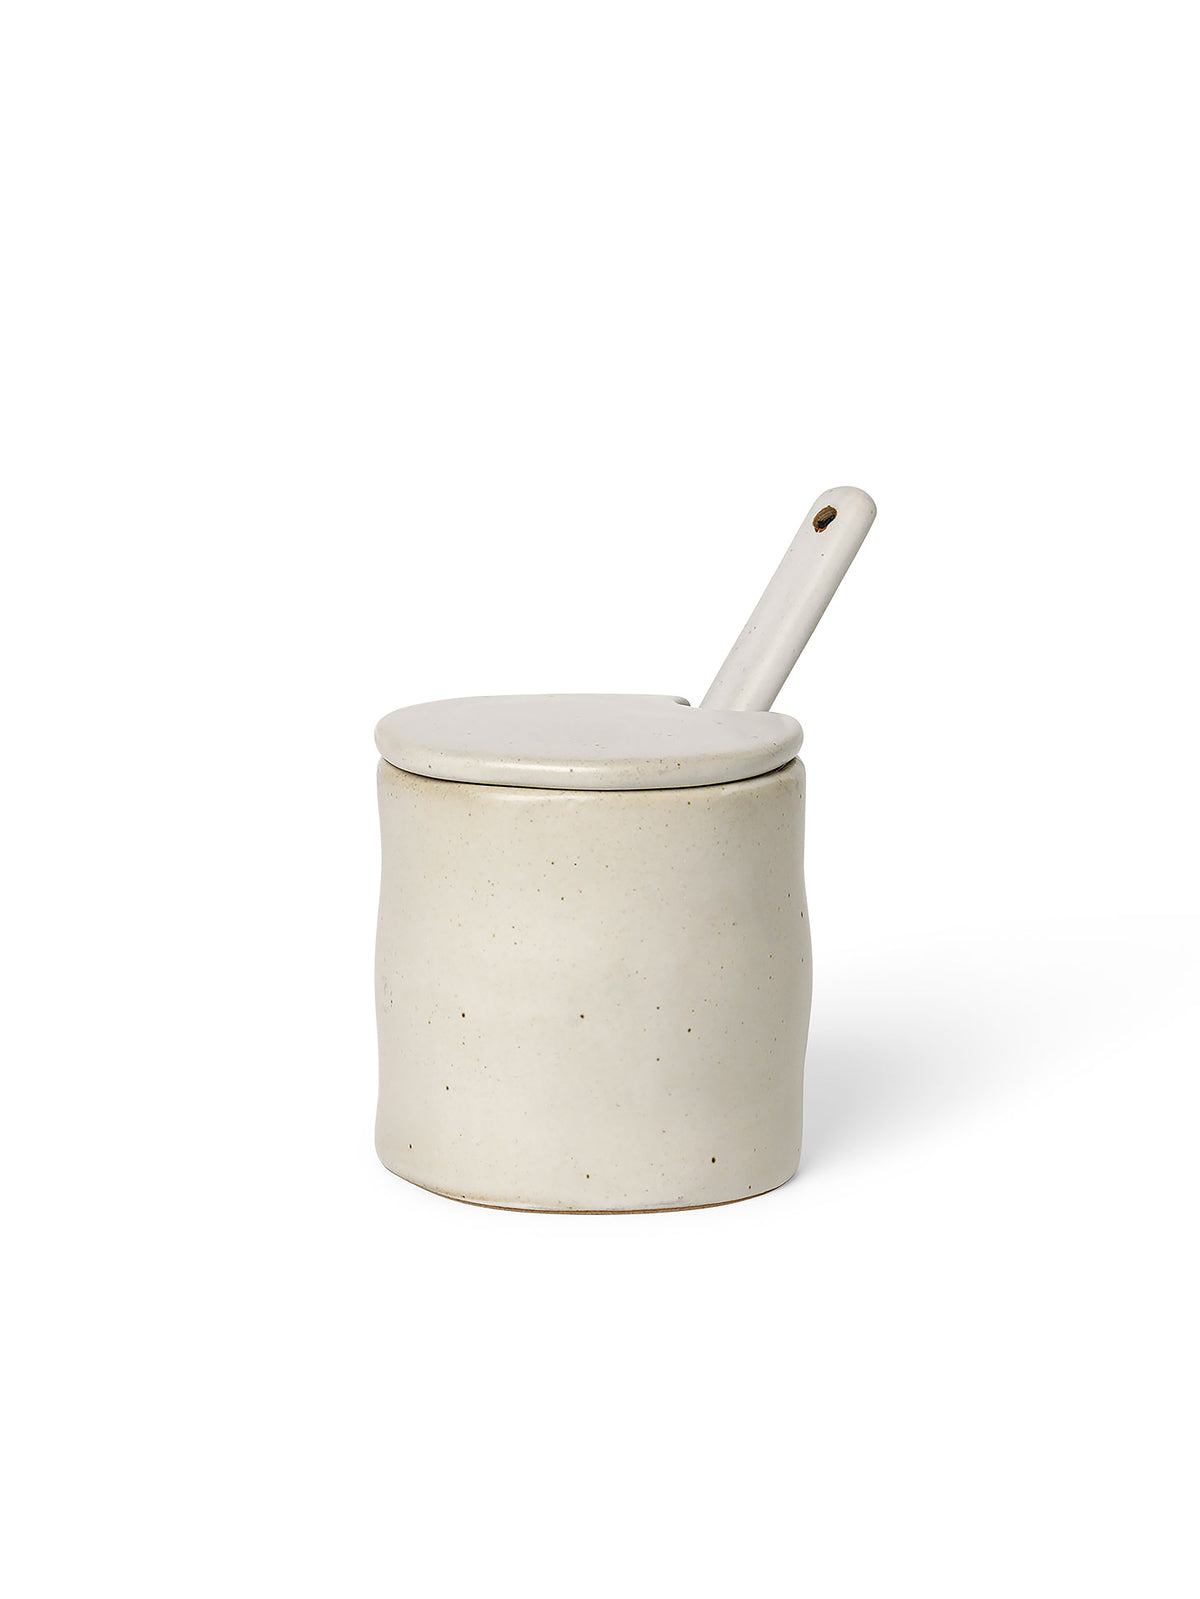 Flow Jar with Spoon | Off-White | Ceramic | by ferm Living - Lifestory - ferm Living